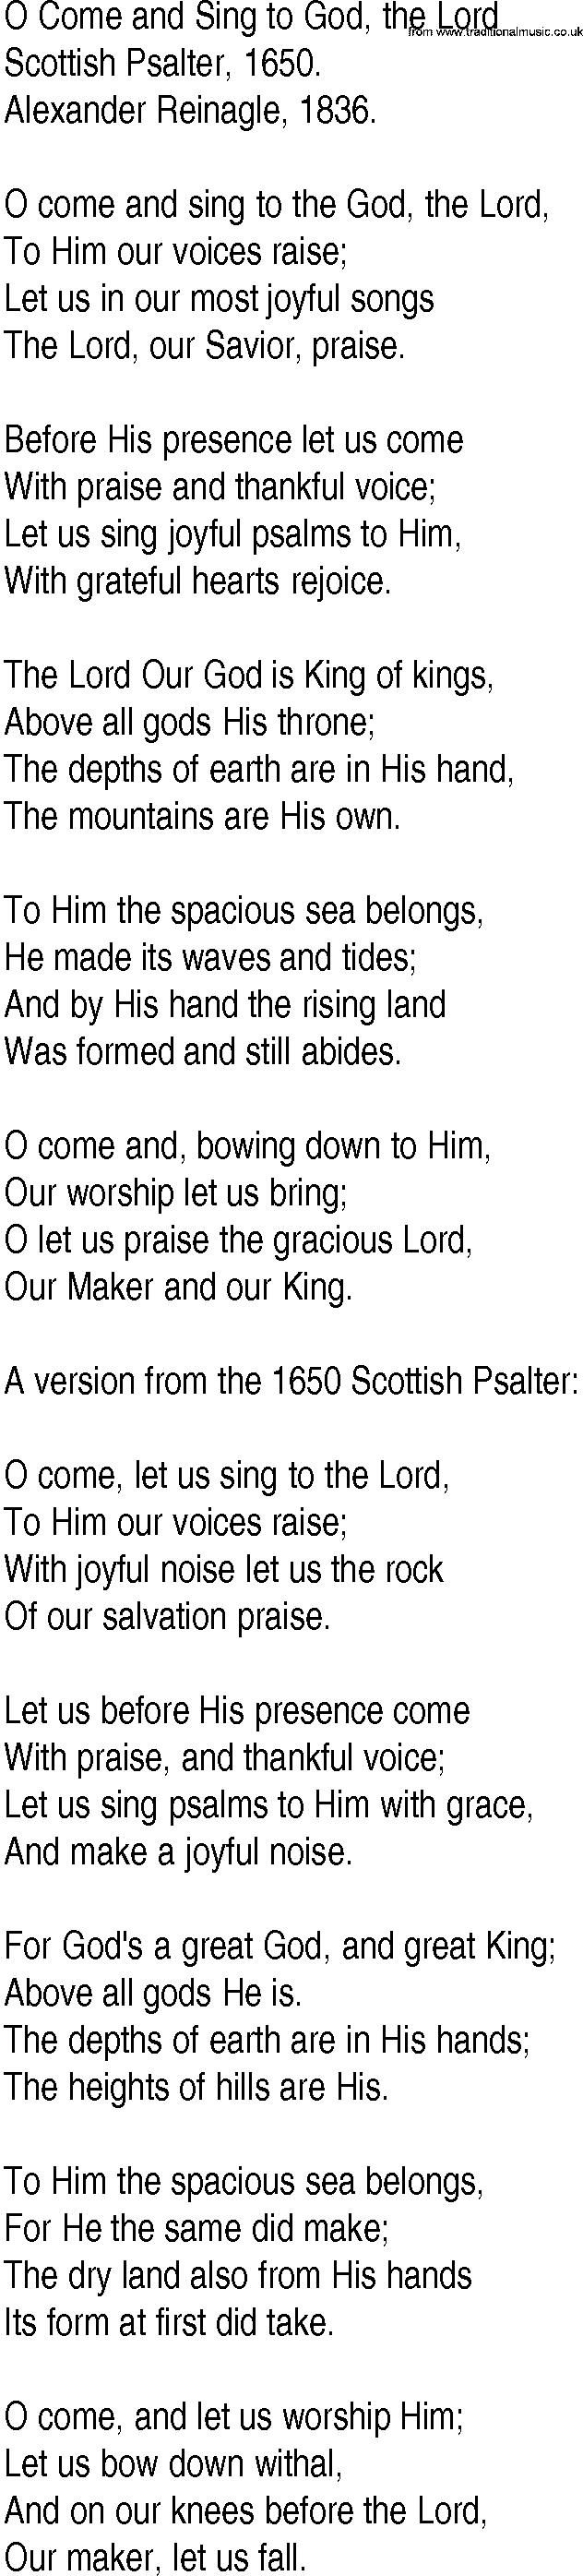 Hymn and Gospel Song: O Come and Sing to God, the Lord by Scottish Psalter lyrics